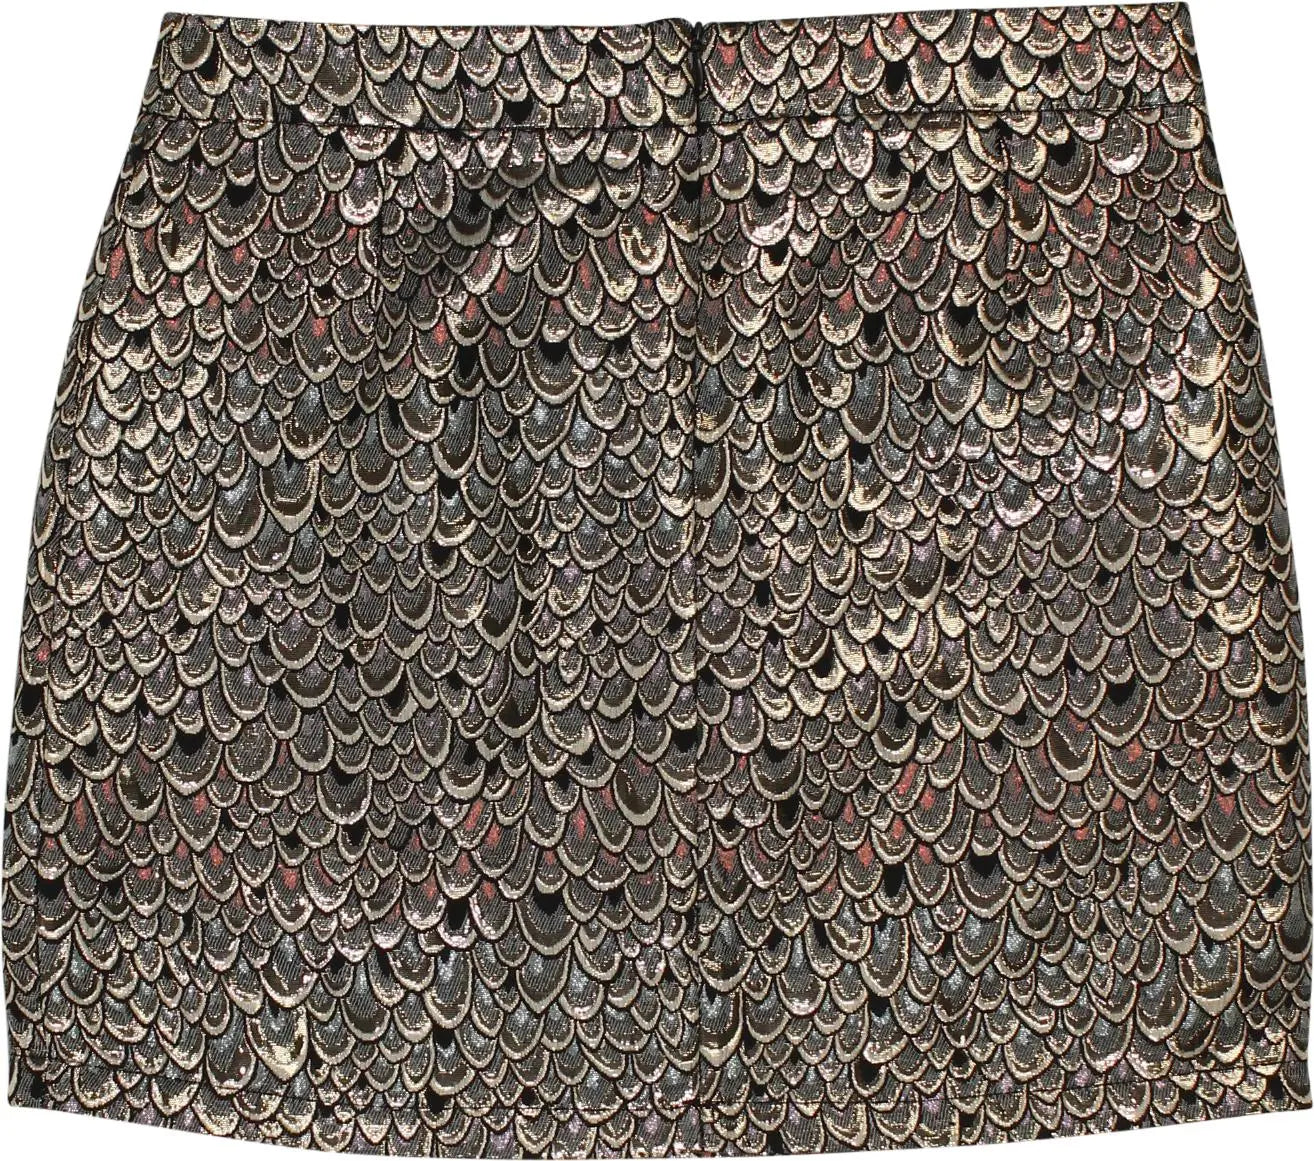 Tramontana - Glitter Skirt- ThriftTale.com - Vintage and second handclothing